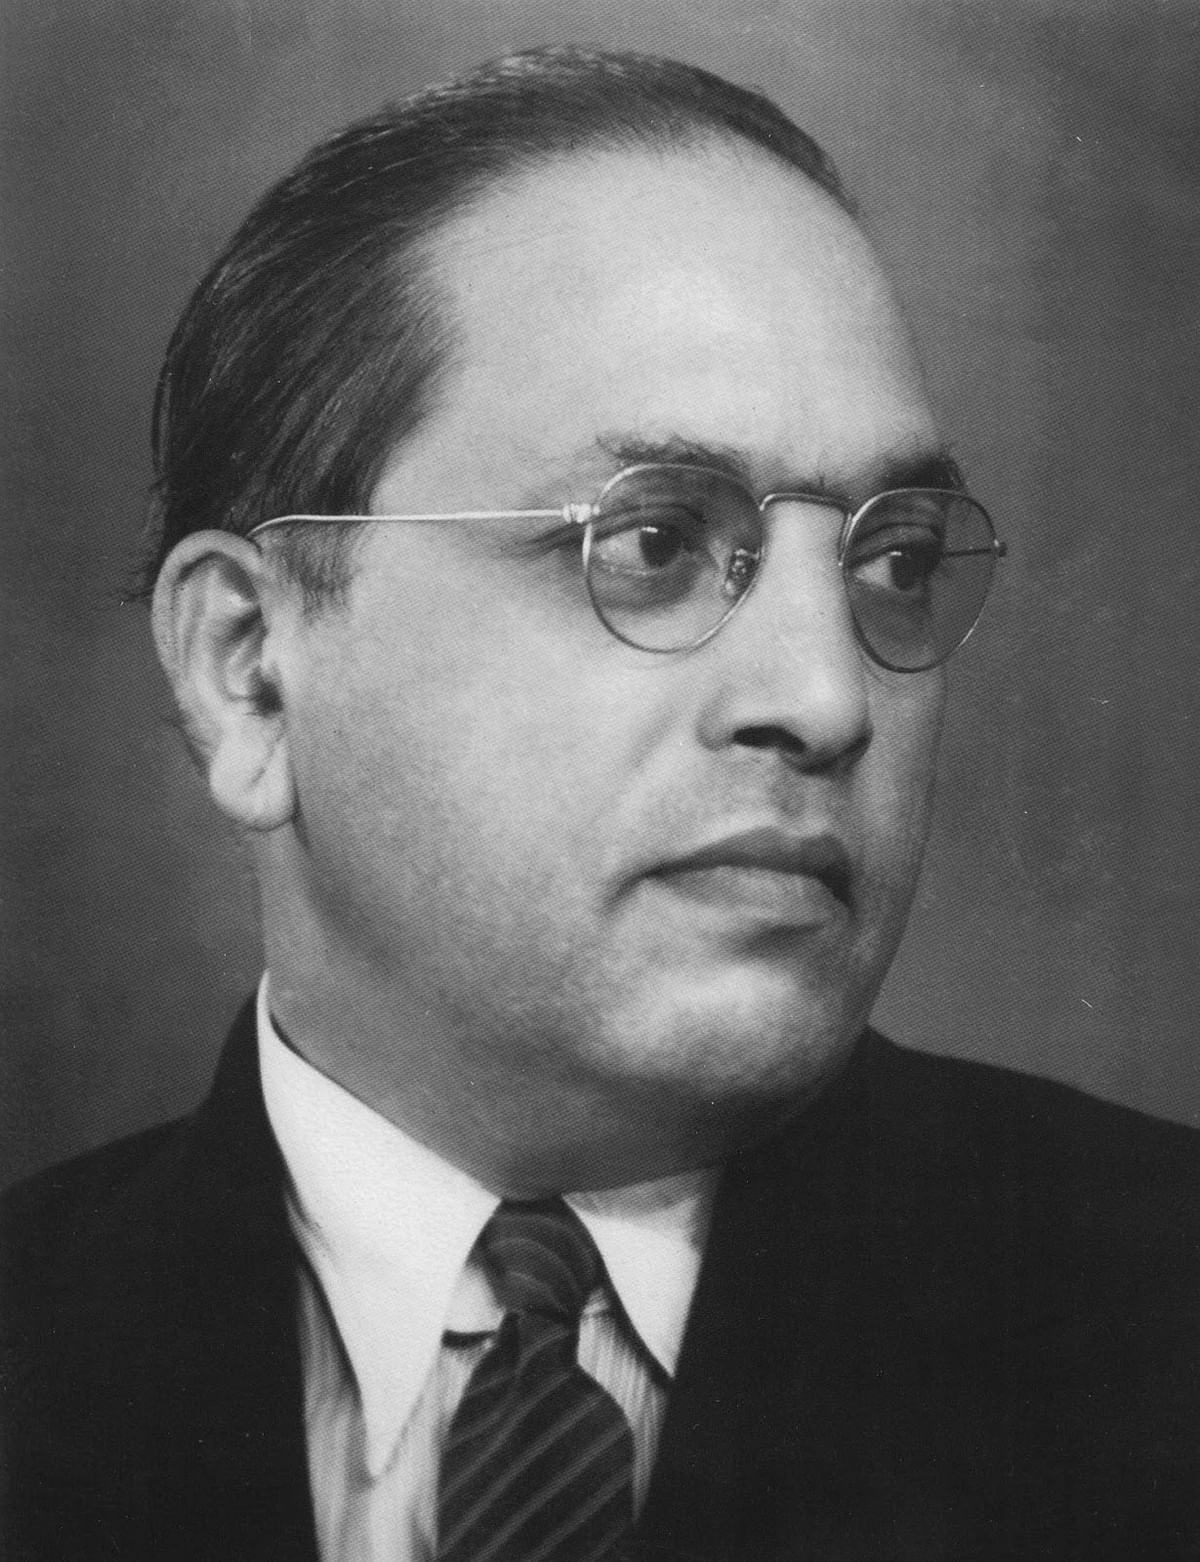 Bhimrao Ramji Ambedkar also known as Babasaheb Ambedkar was a social reformer, lawyer and politician who inspired the Dalit Buddhist movement and campaigned against social discrimination towards Dalits. Credit: Wikimedia Commons